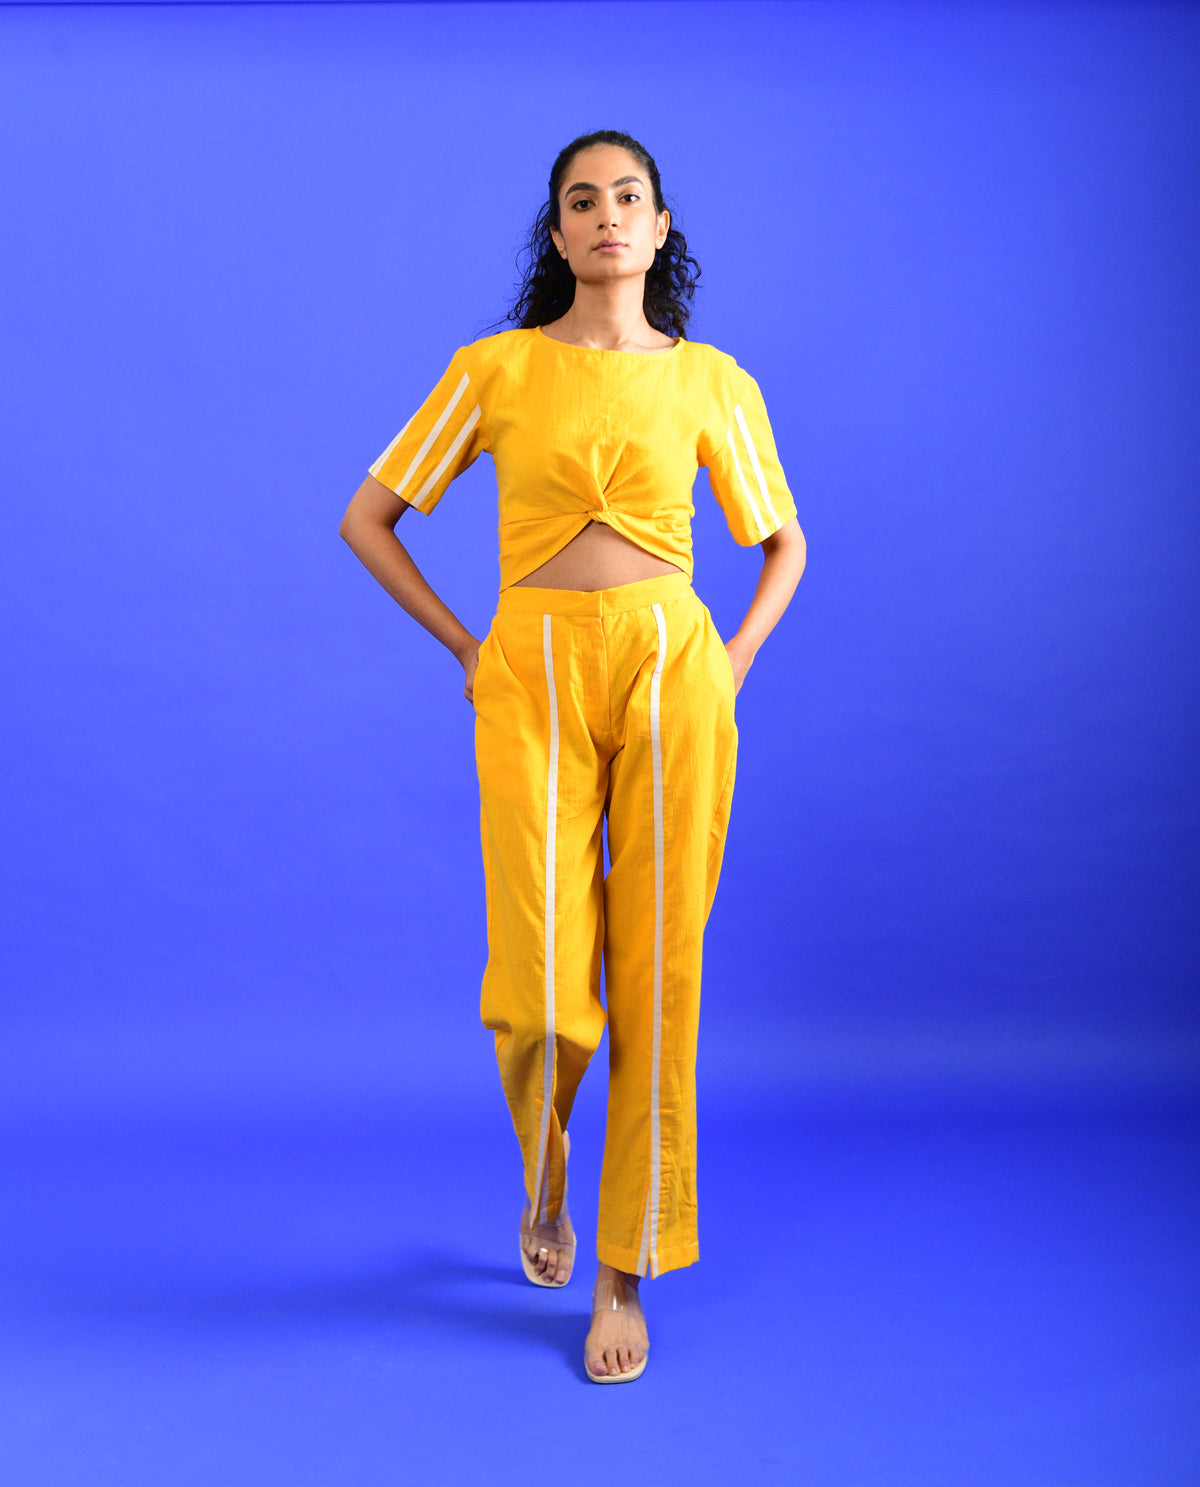 Yellow Solid Co-ord Set at Kamakhyaa by Rias Jaipur. This item is Casual Wear, Co-ord Sets, Handloom Cotton, Handspun, Handwoven, Hue, Regular Fit, Solids, Stripes, Travel, Travel Co-ords, Womenswear, Yellow